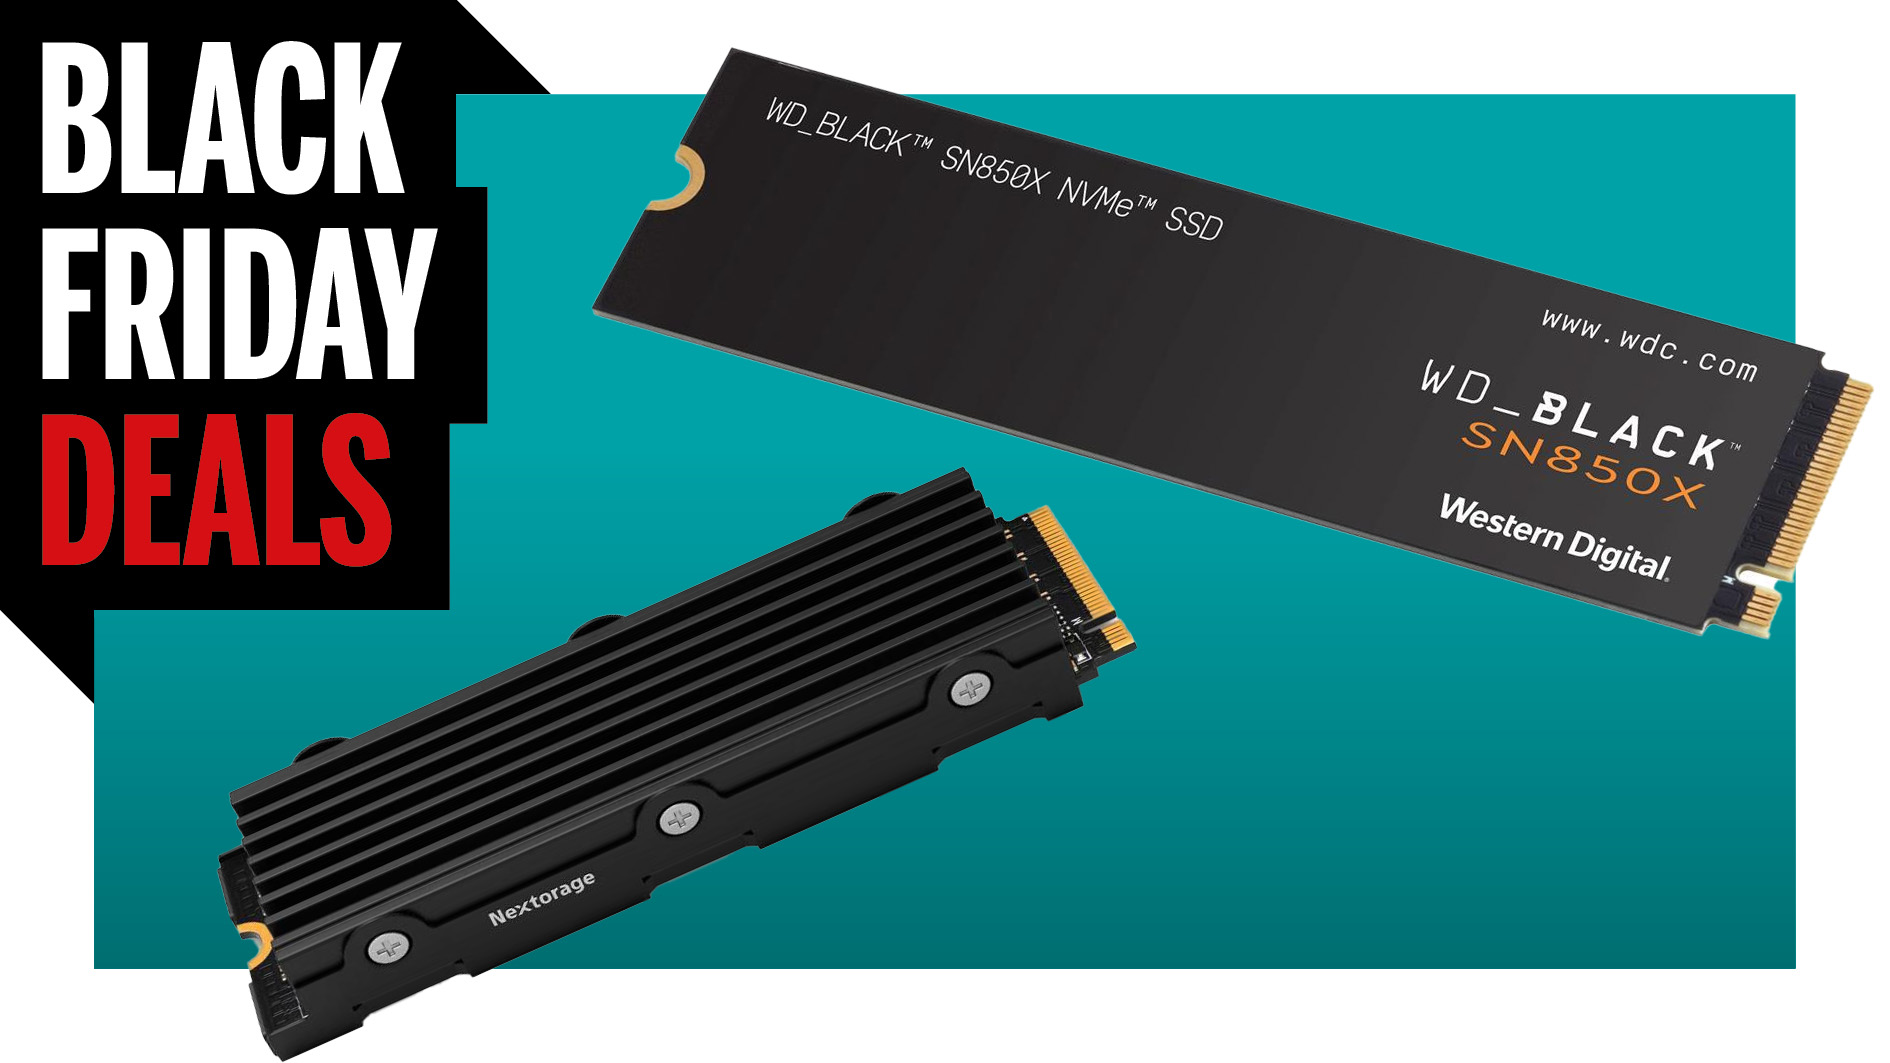 PS5-compatible Seagate NVMe SSD hits 7,300MB/s, and works with